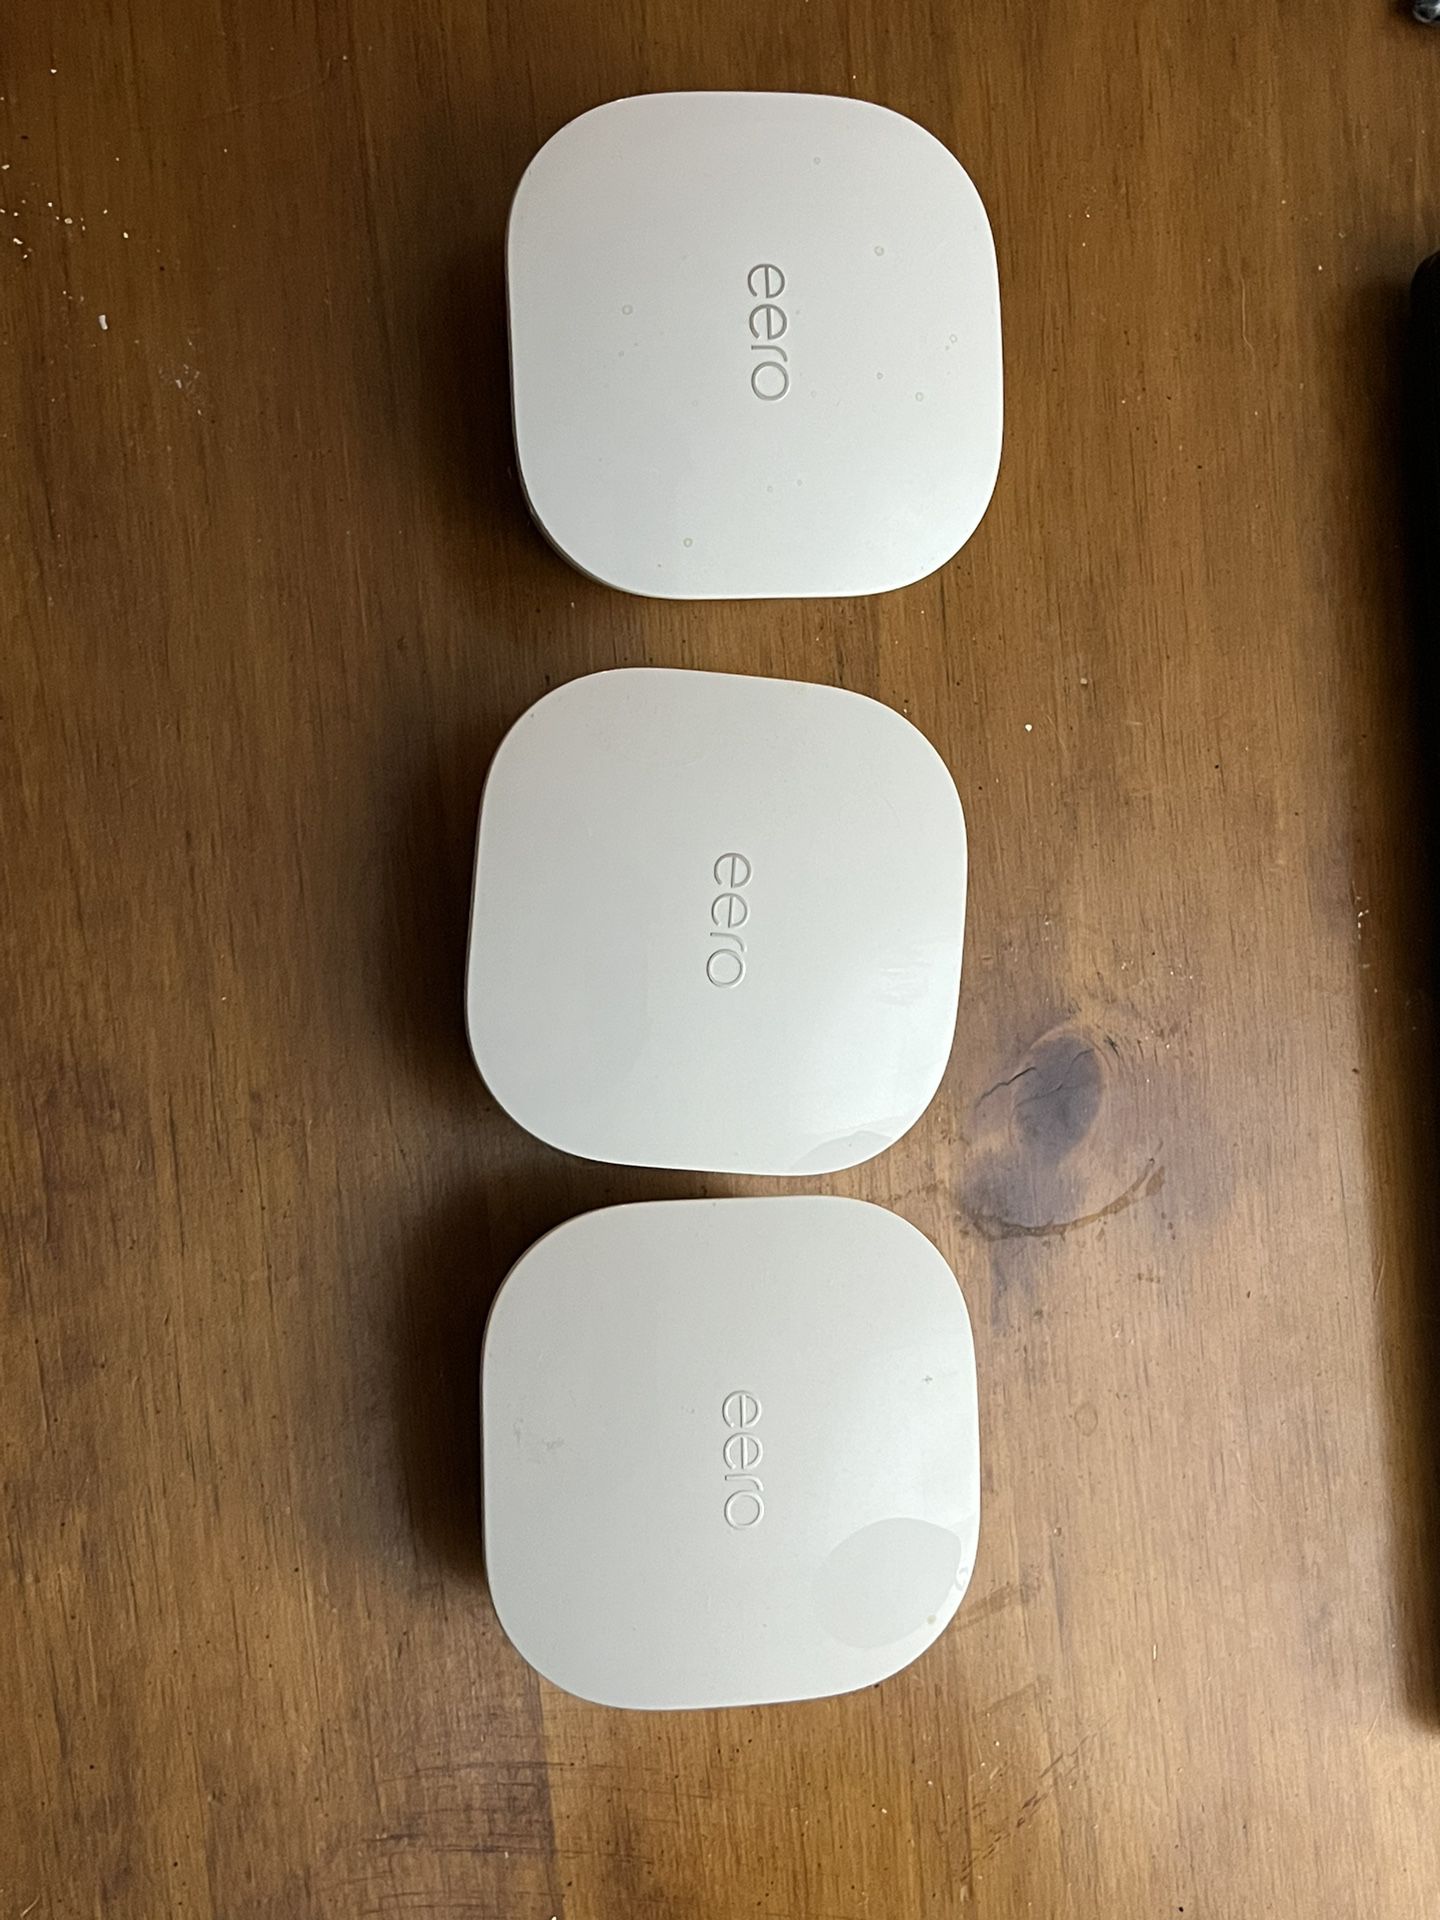 eero mesh routers/access points 